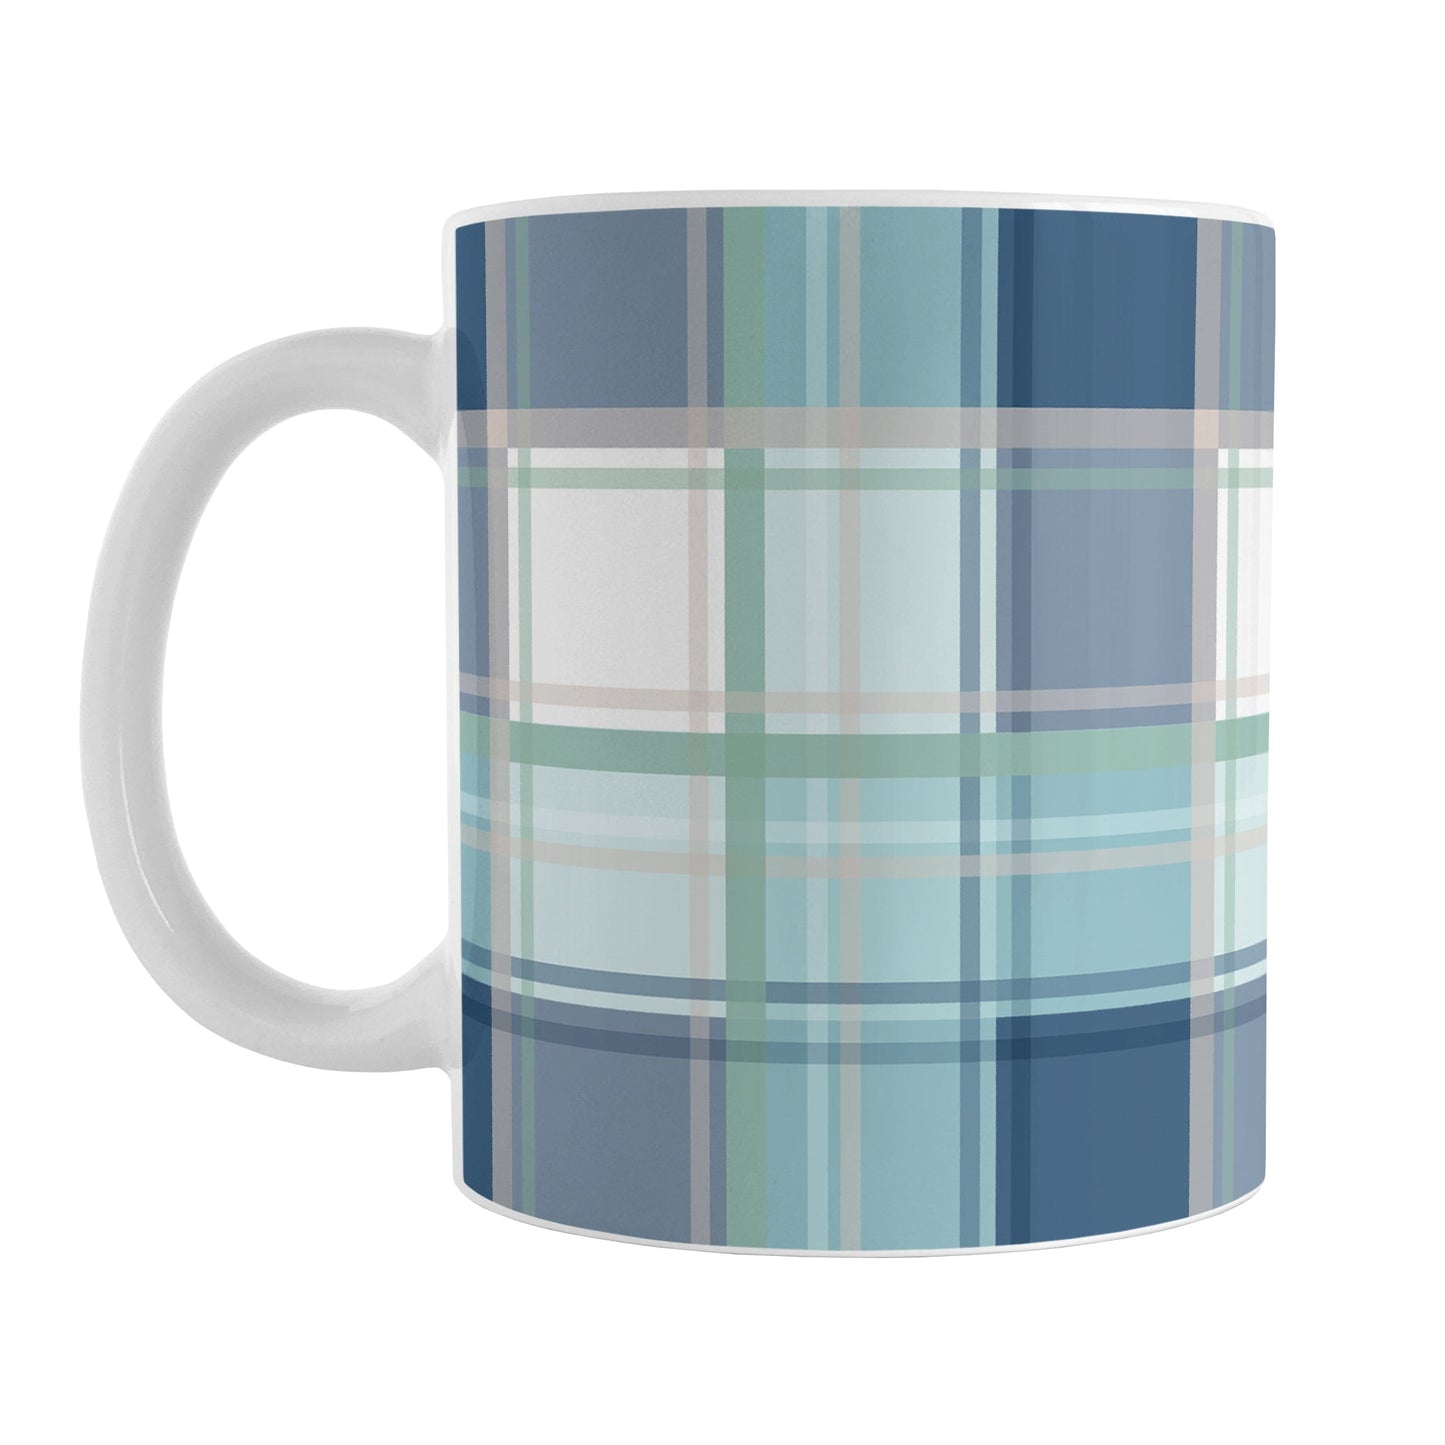 Coastal Plaid Mug (11oz) at Amy's Coffee Mugs. A ceramic coffee mug designed with a plaid pattern in a coastal color scheme that wraps around the mug to the handle. It's the perfect mug for people who love the beach and coastal designs in navy blue, light blue, sandy beige, and green. 